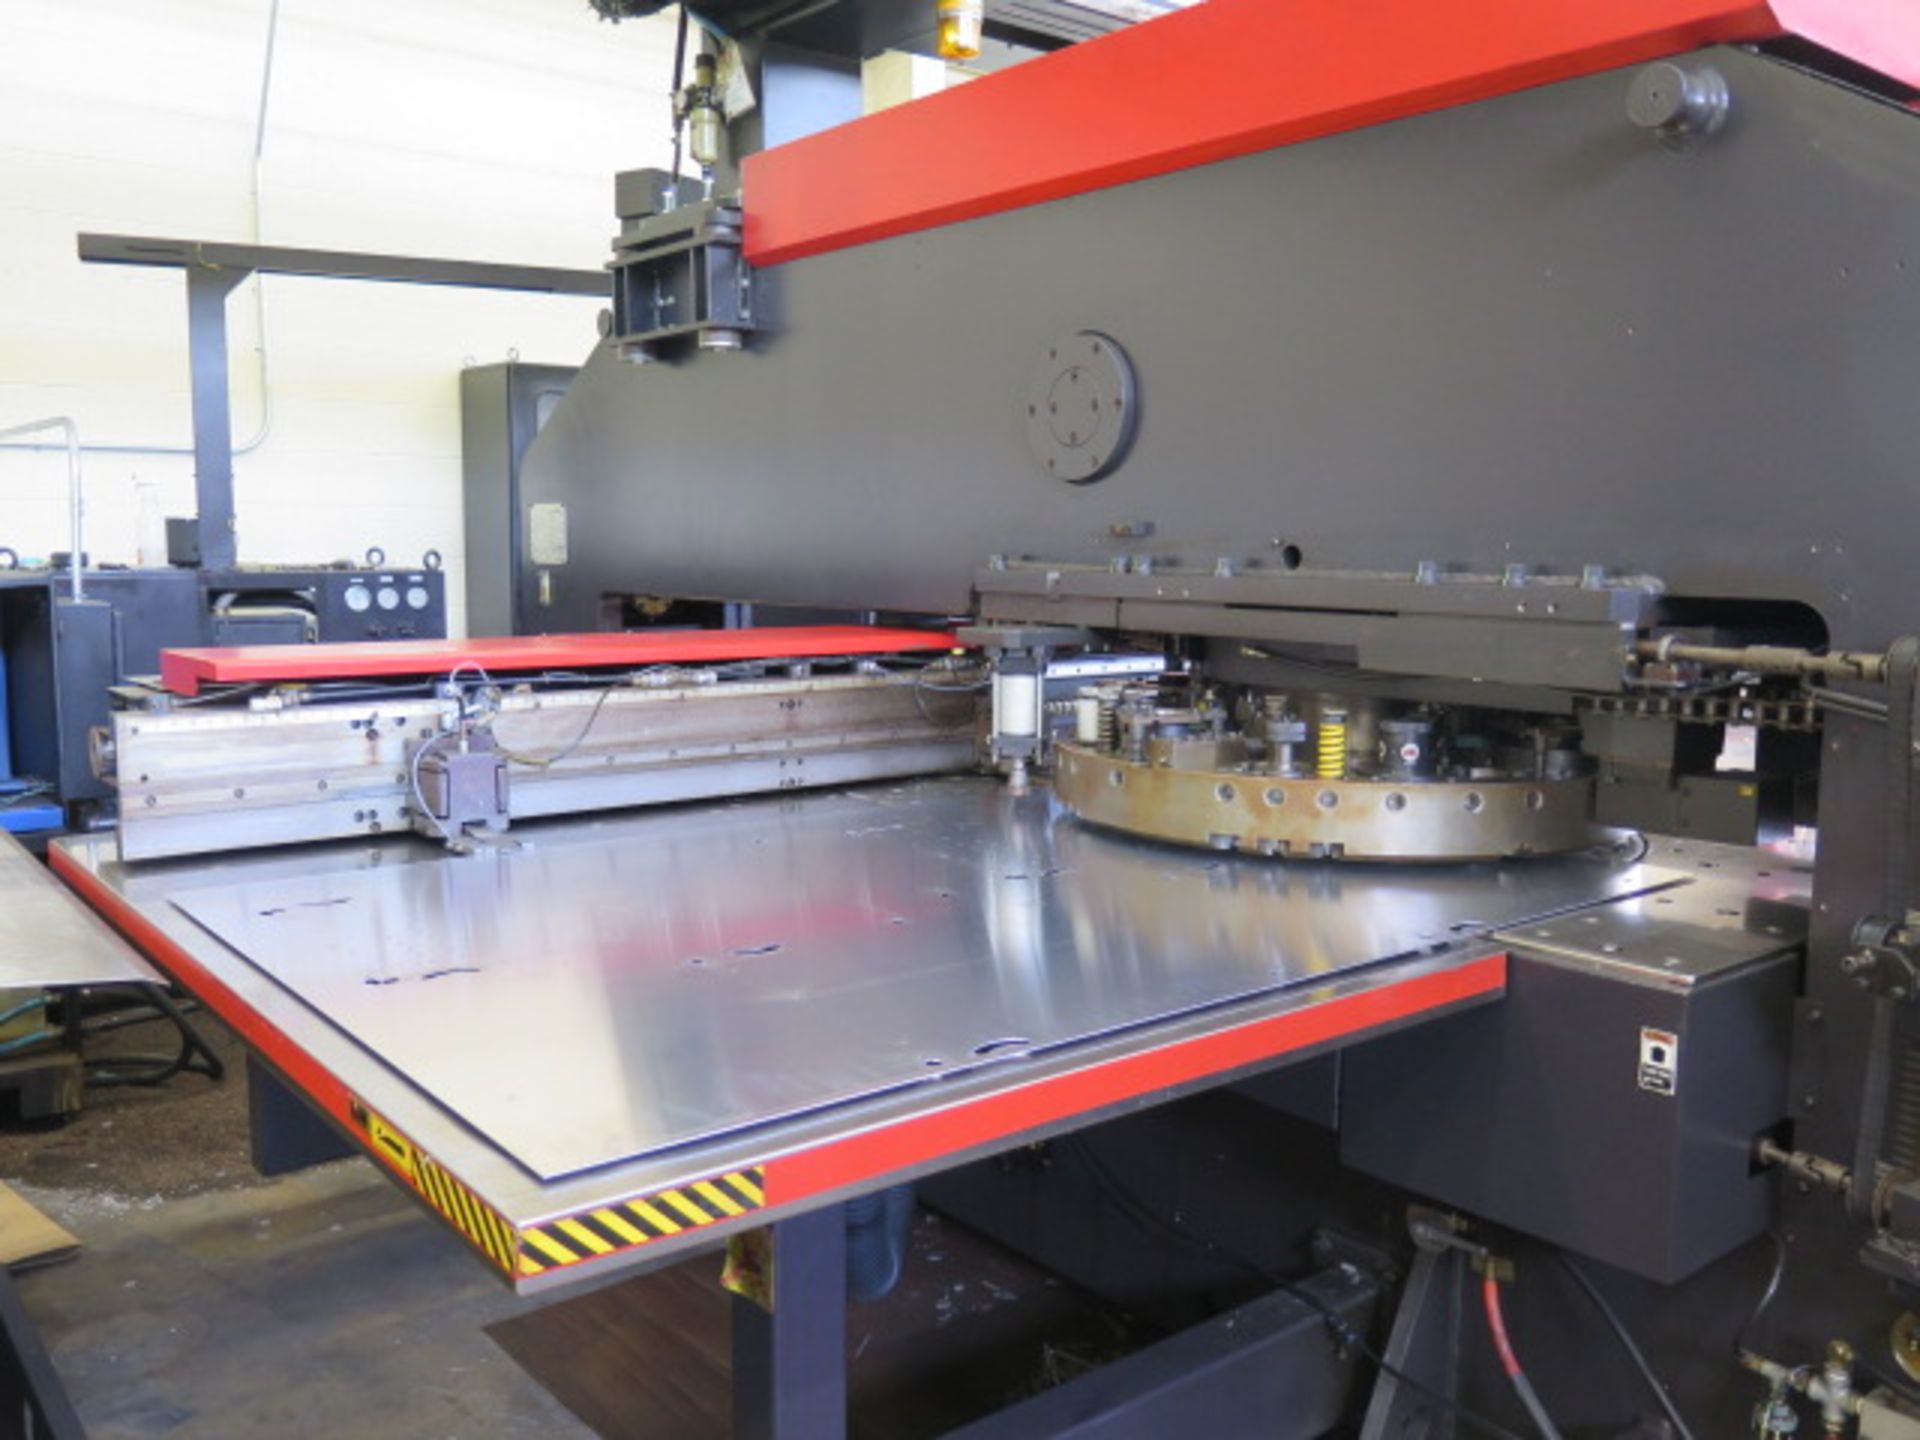 Amada VIPROS 357 30-Ton CNC Turret Punch Cell s/n 35710664 w/ 04P-C Controls, 58-Station, SOLD AS IS - Image 11 of 37